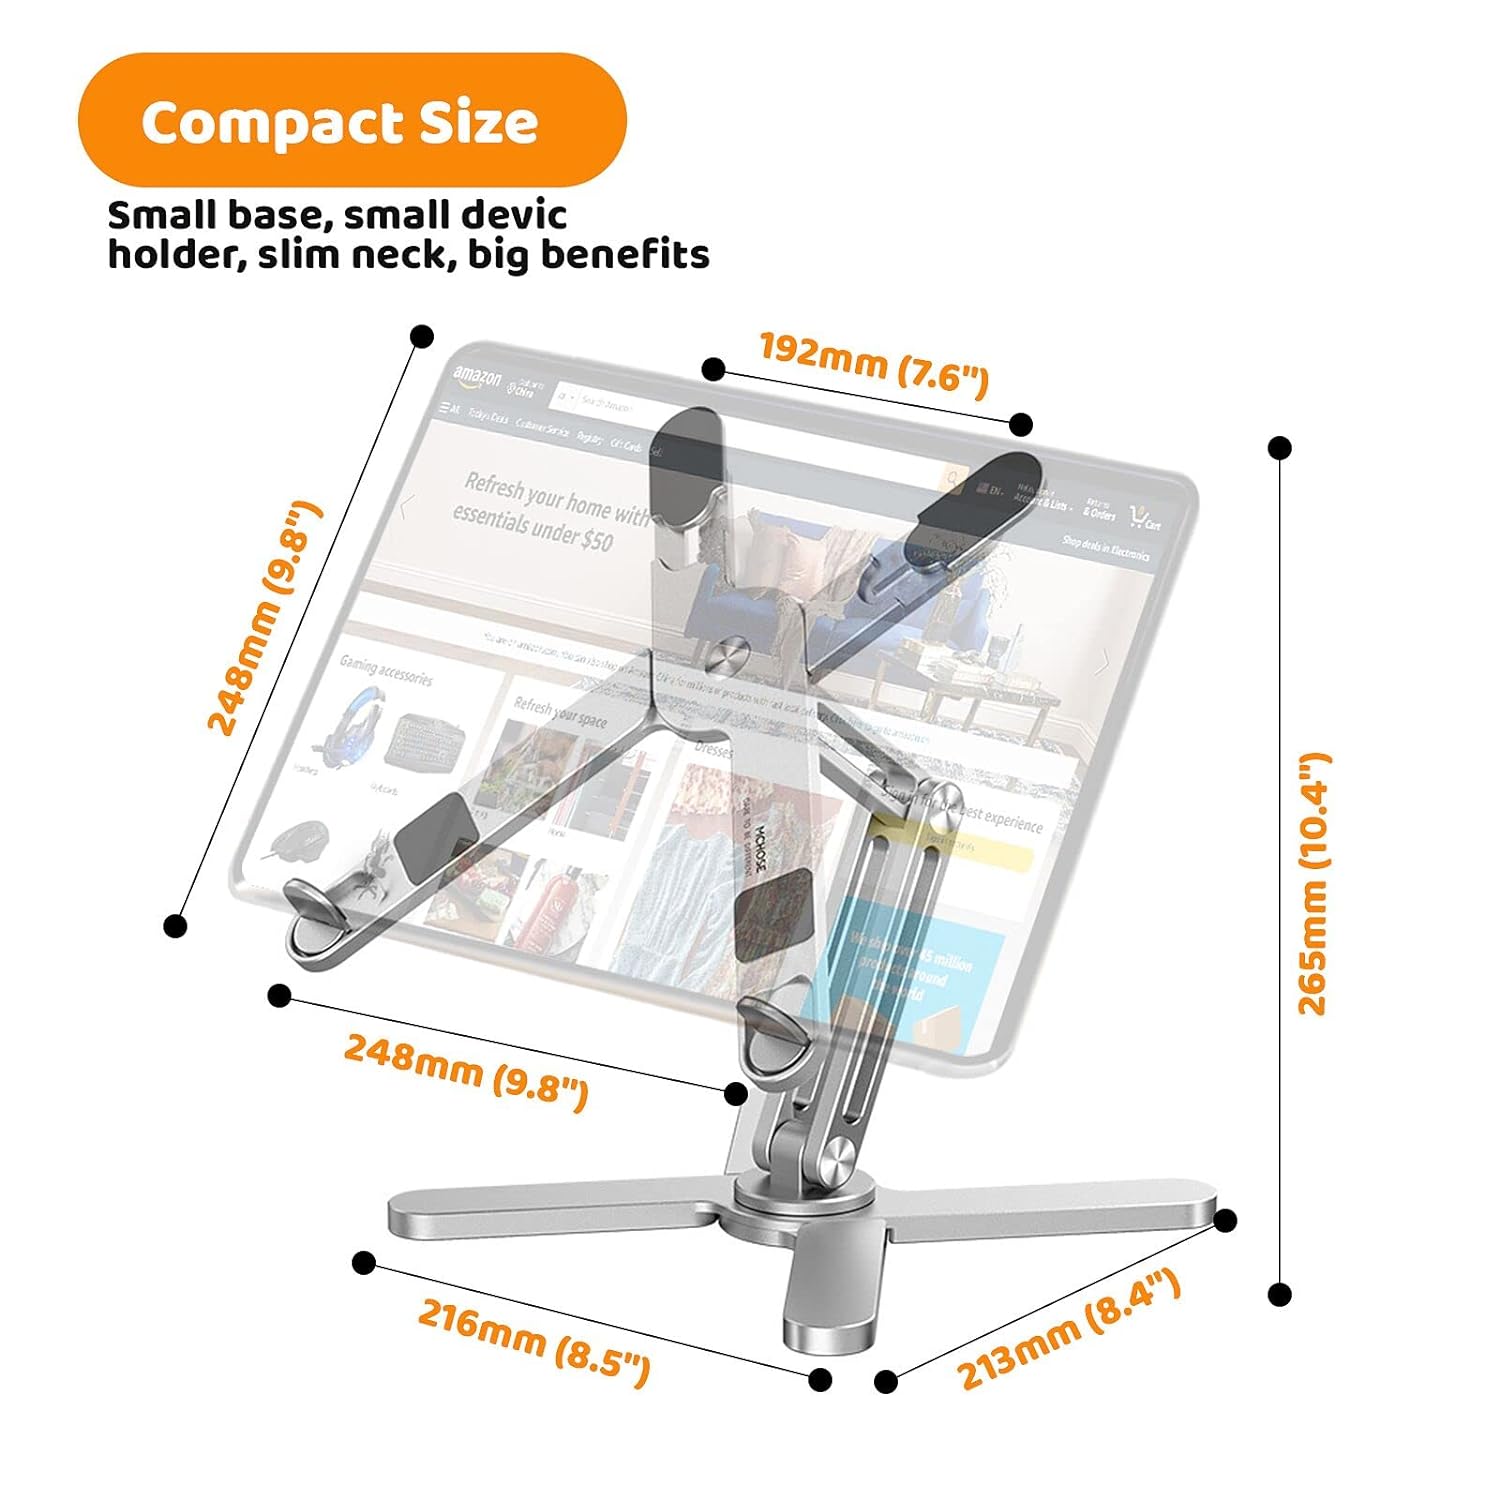 Moallia Ergonomic Laptop Riser Telescopic 360 Rotating Laptop Stand for Desk Collaborative Work, Fully Foldable for Easy Storage, Fits All MacBook, Laptops up to 16 inches